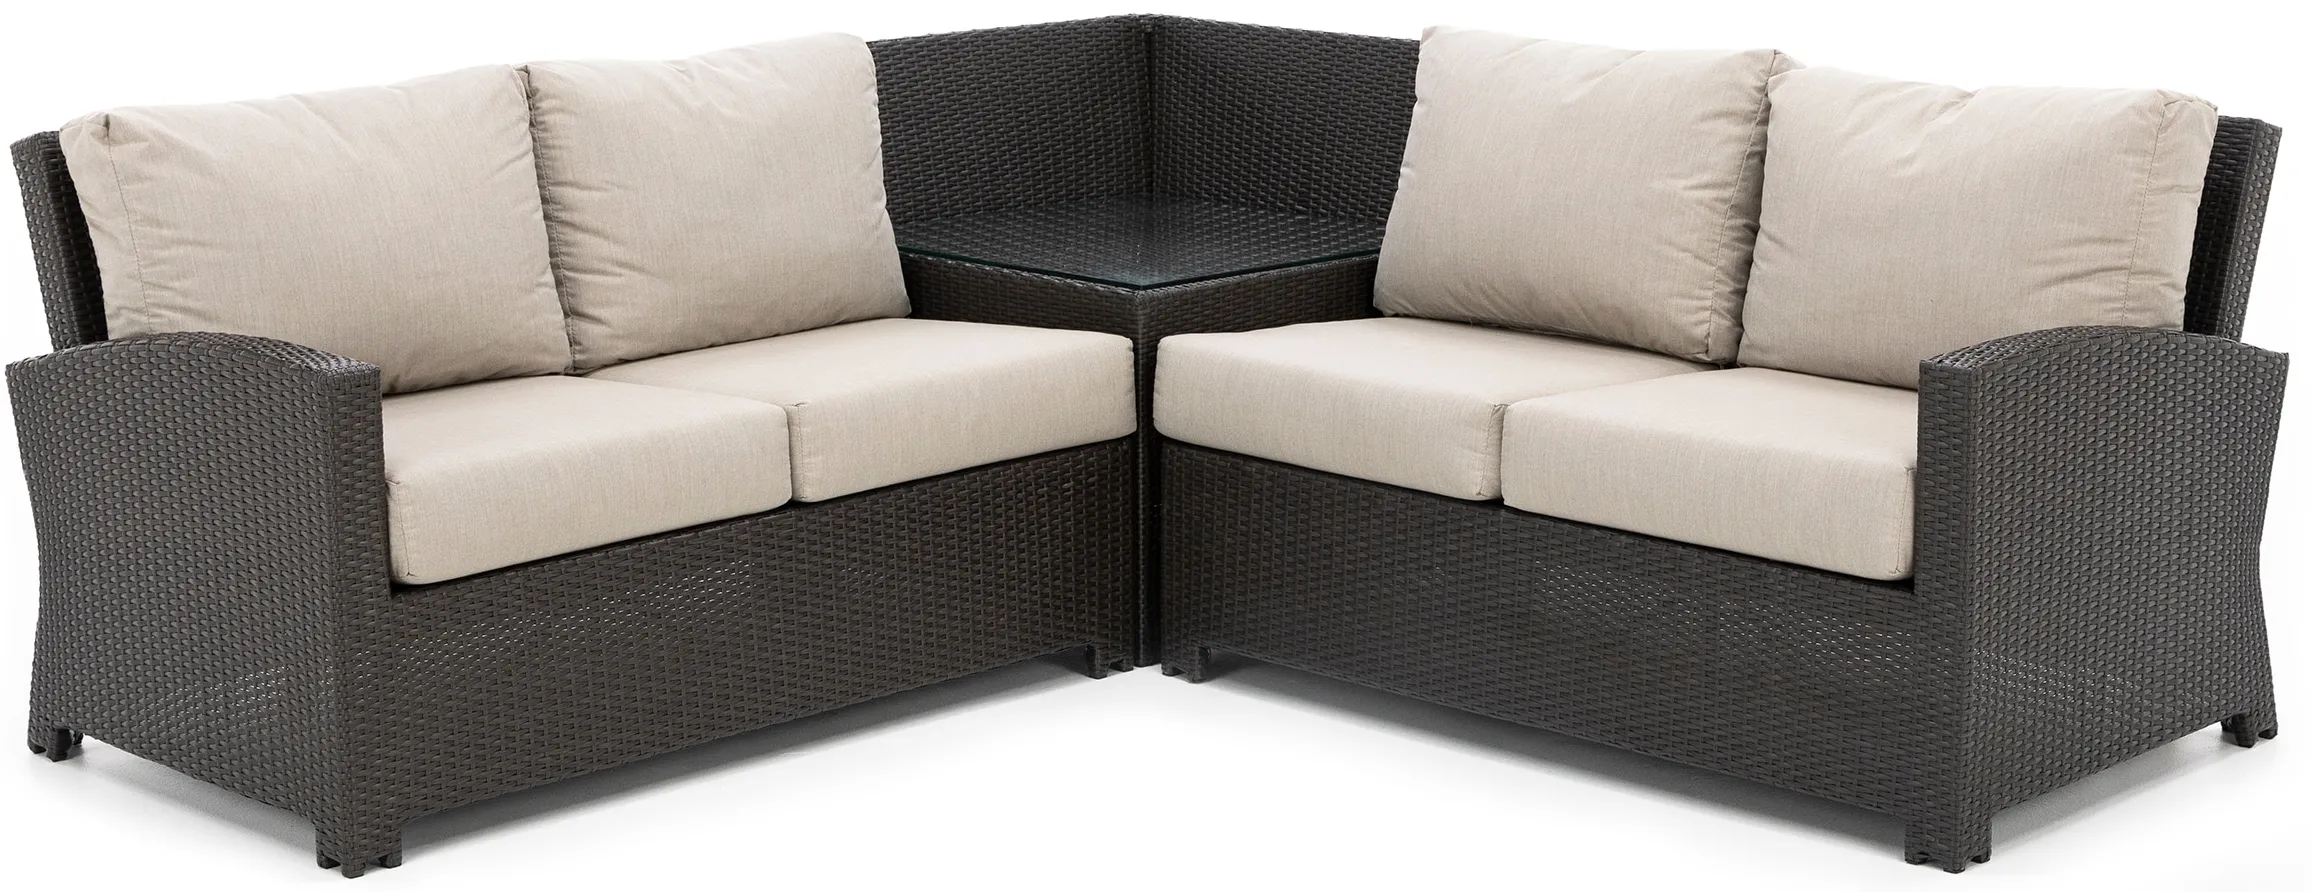 Cabo 3-pc Sectional